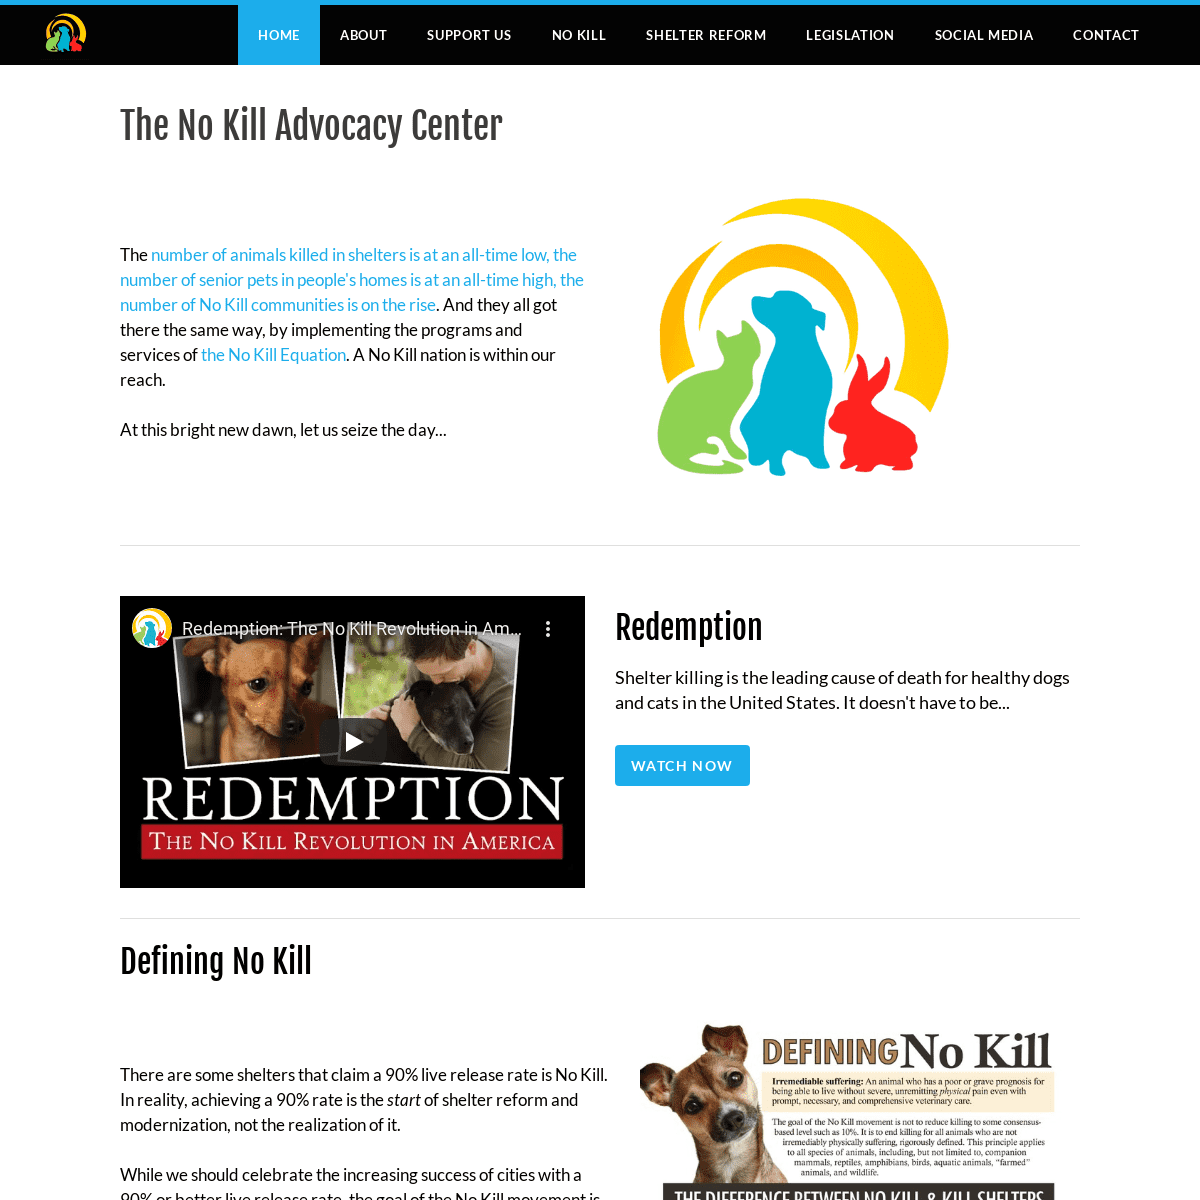 A complete backup of https://nokilladvocacycenter.org